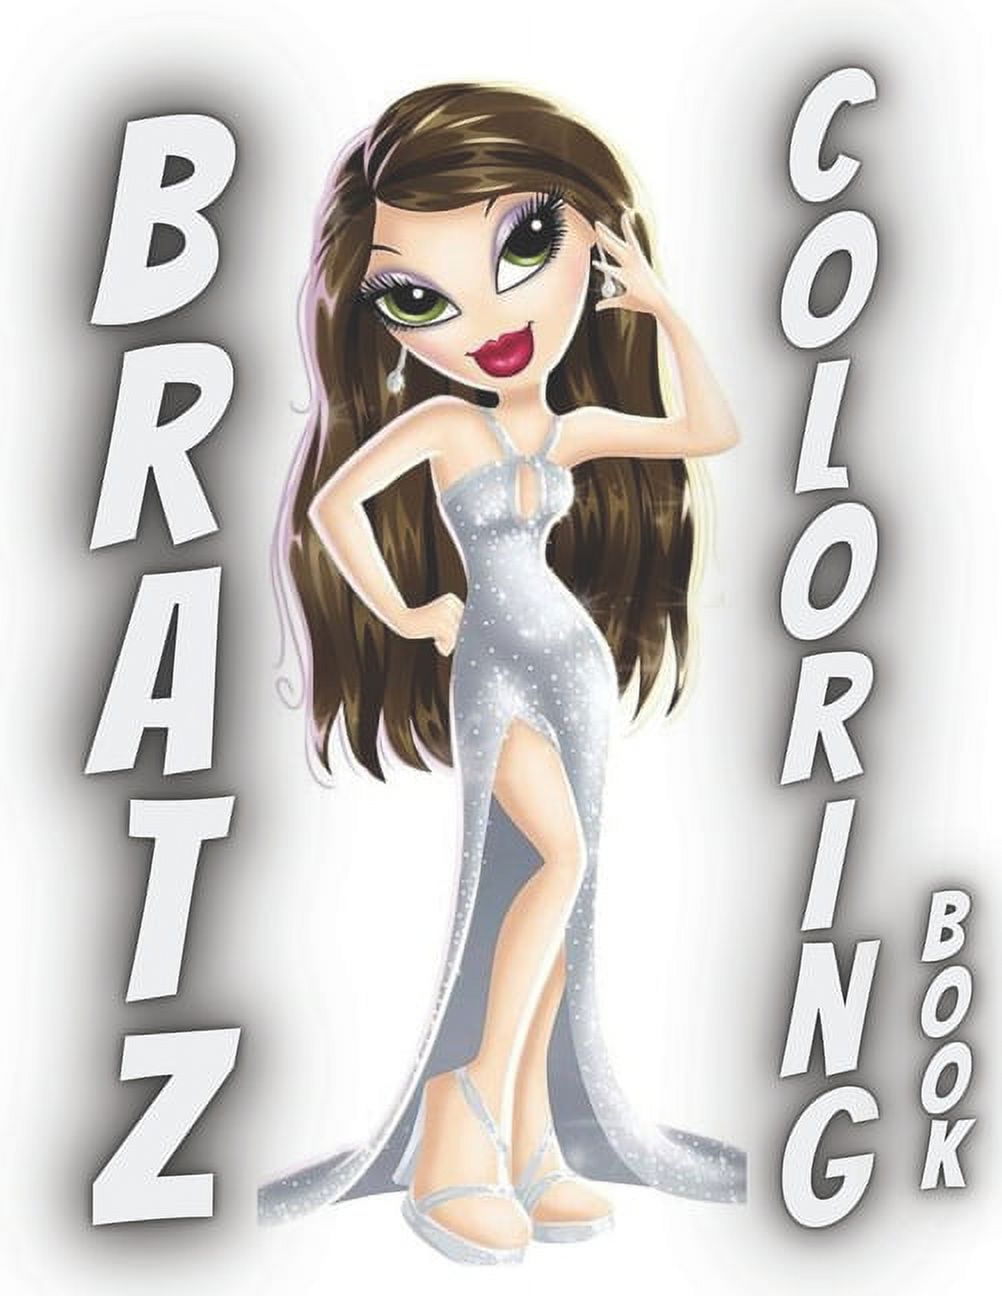 bratz coloring book: BRATZ Coloring Book: An Amazing Coloring Book For  Relaxation, Stress Relieving And Have Fun With Adorable Characters Of BRATZ